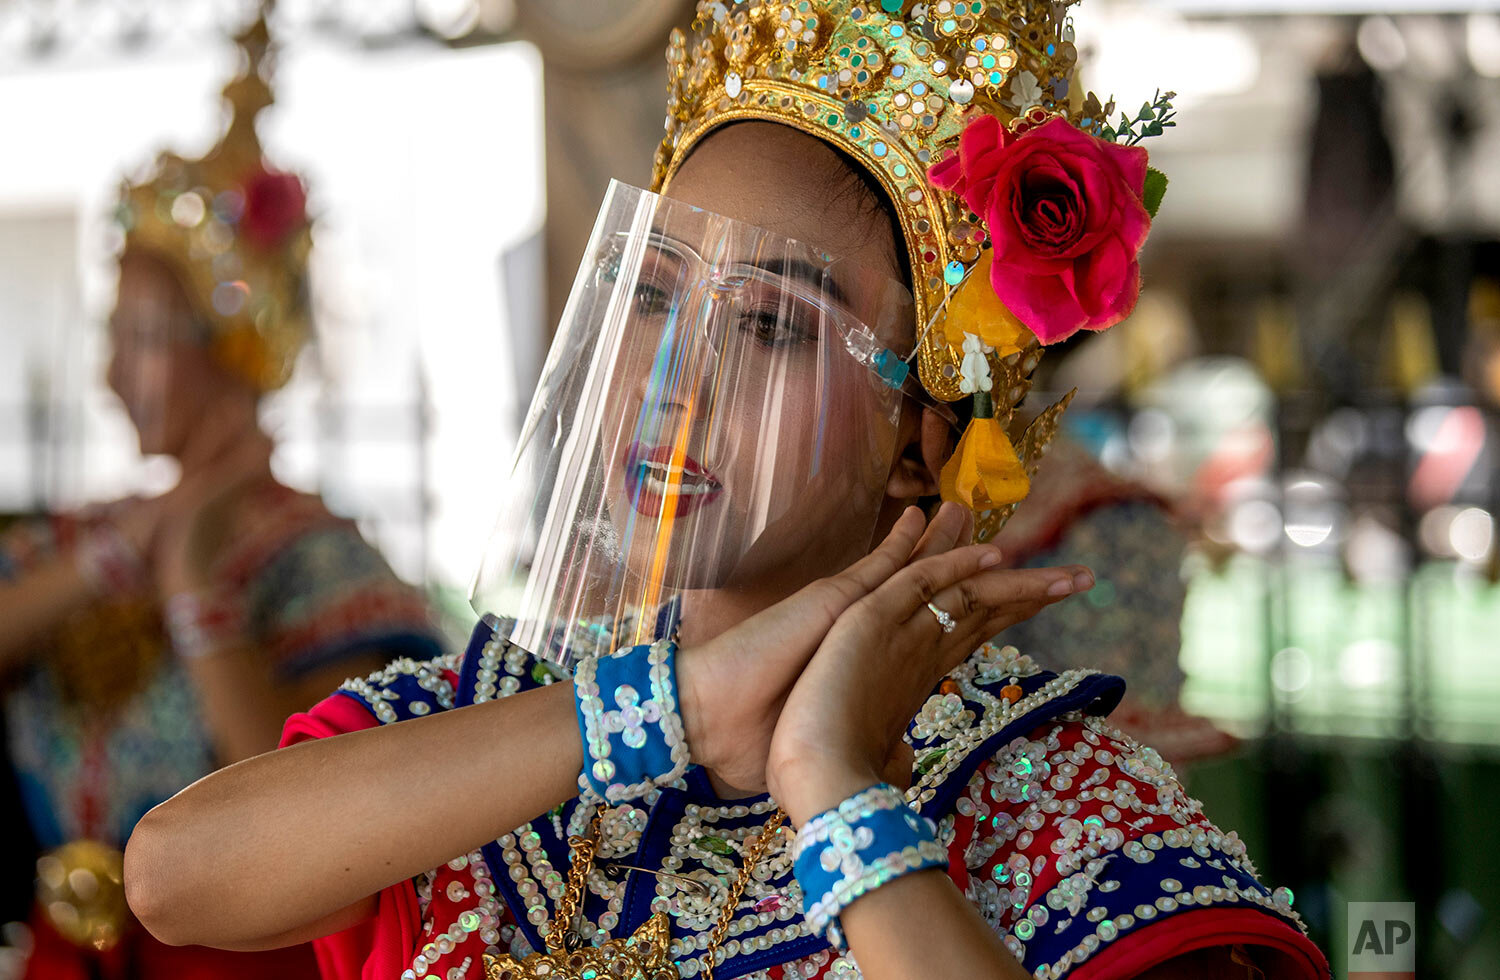  A Thai classical dancer wearing a face shield to help curb the spread of the coronavirus performs at the Erawan Shrine in Bangkok, Thailand, Thursday, May 28, 2020. (AP Photo/Sakchai Lalit) 